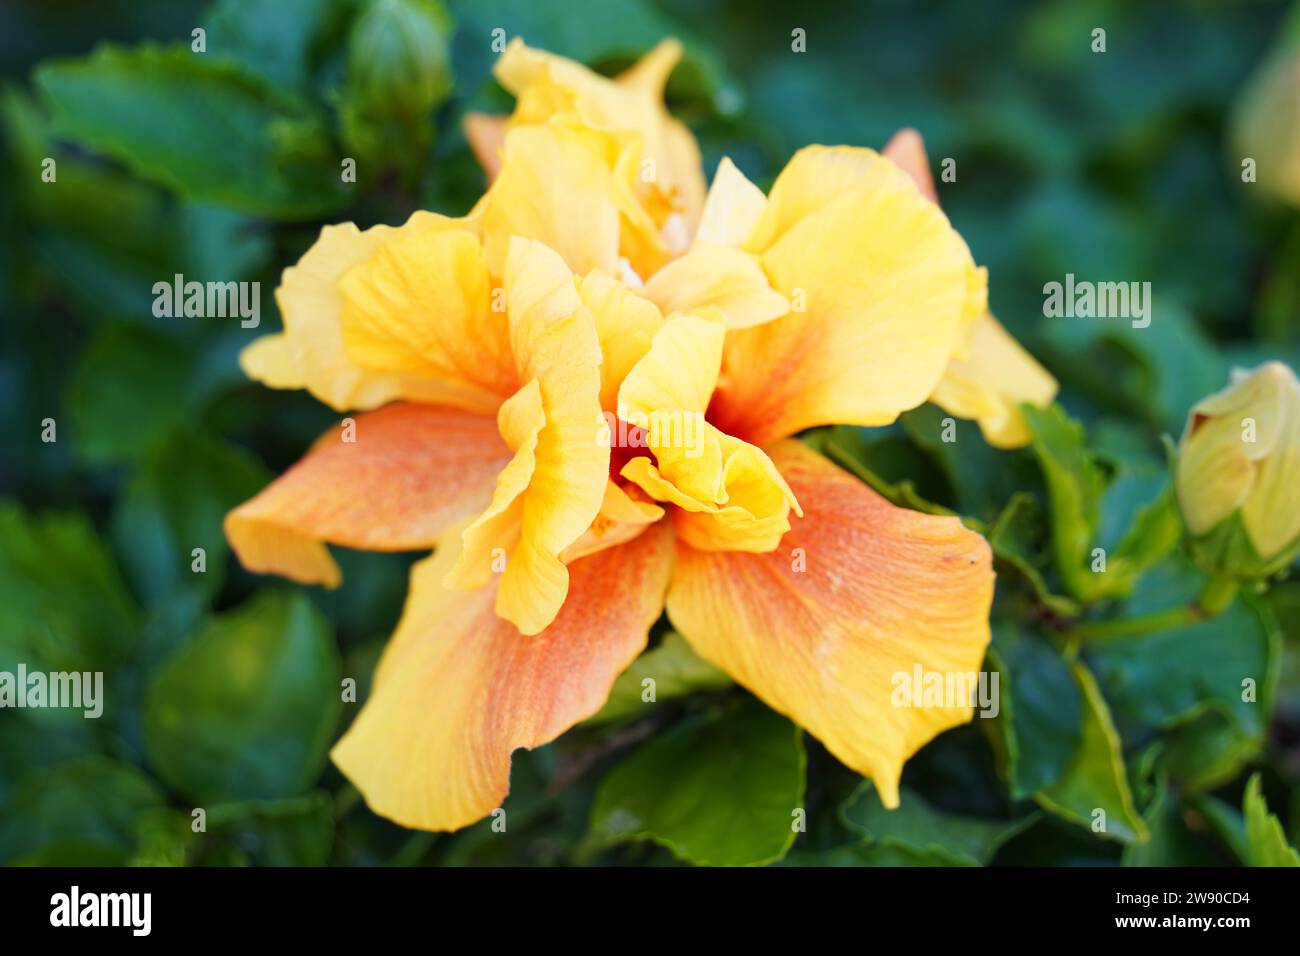 Blossom of tropical Hibiscus red flower. The tropical plant Hibiscus Rosa-sinensis, at bloom in a botanic garden. Stock Photo